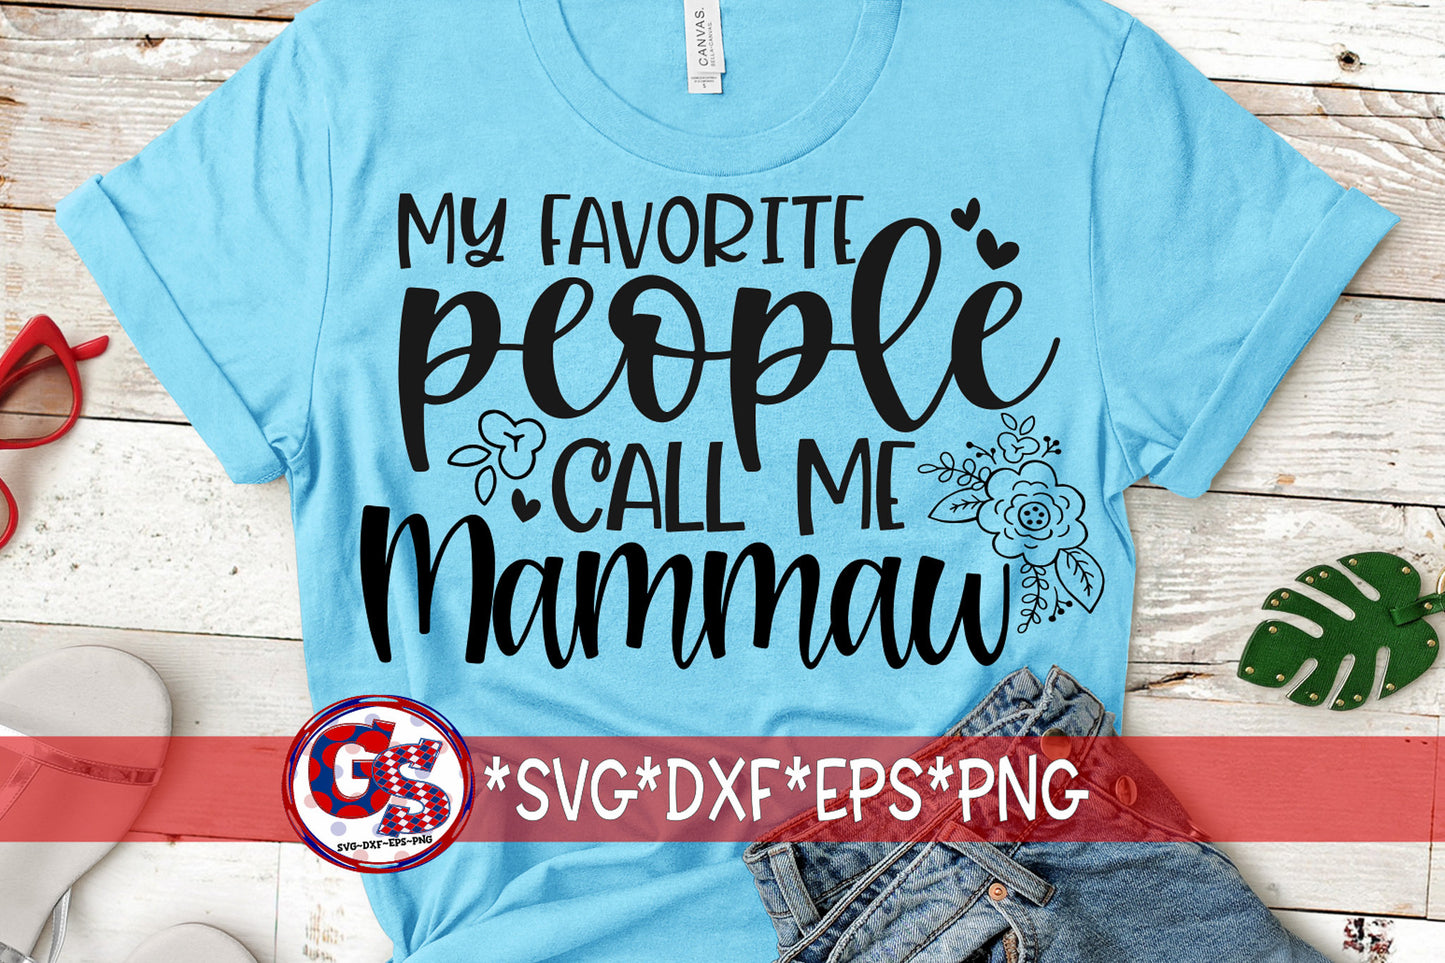 My Favorite People Call Me Mammaw svg dxf eps png | Mother&#39;s Day SVG | Mammaw SVG | Call Me Mammaw svg | Instant Download Cut File.